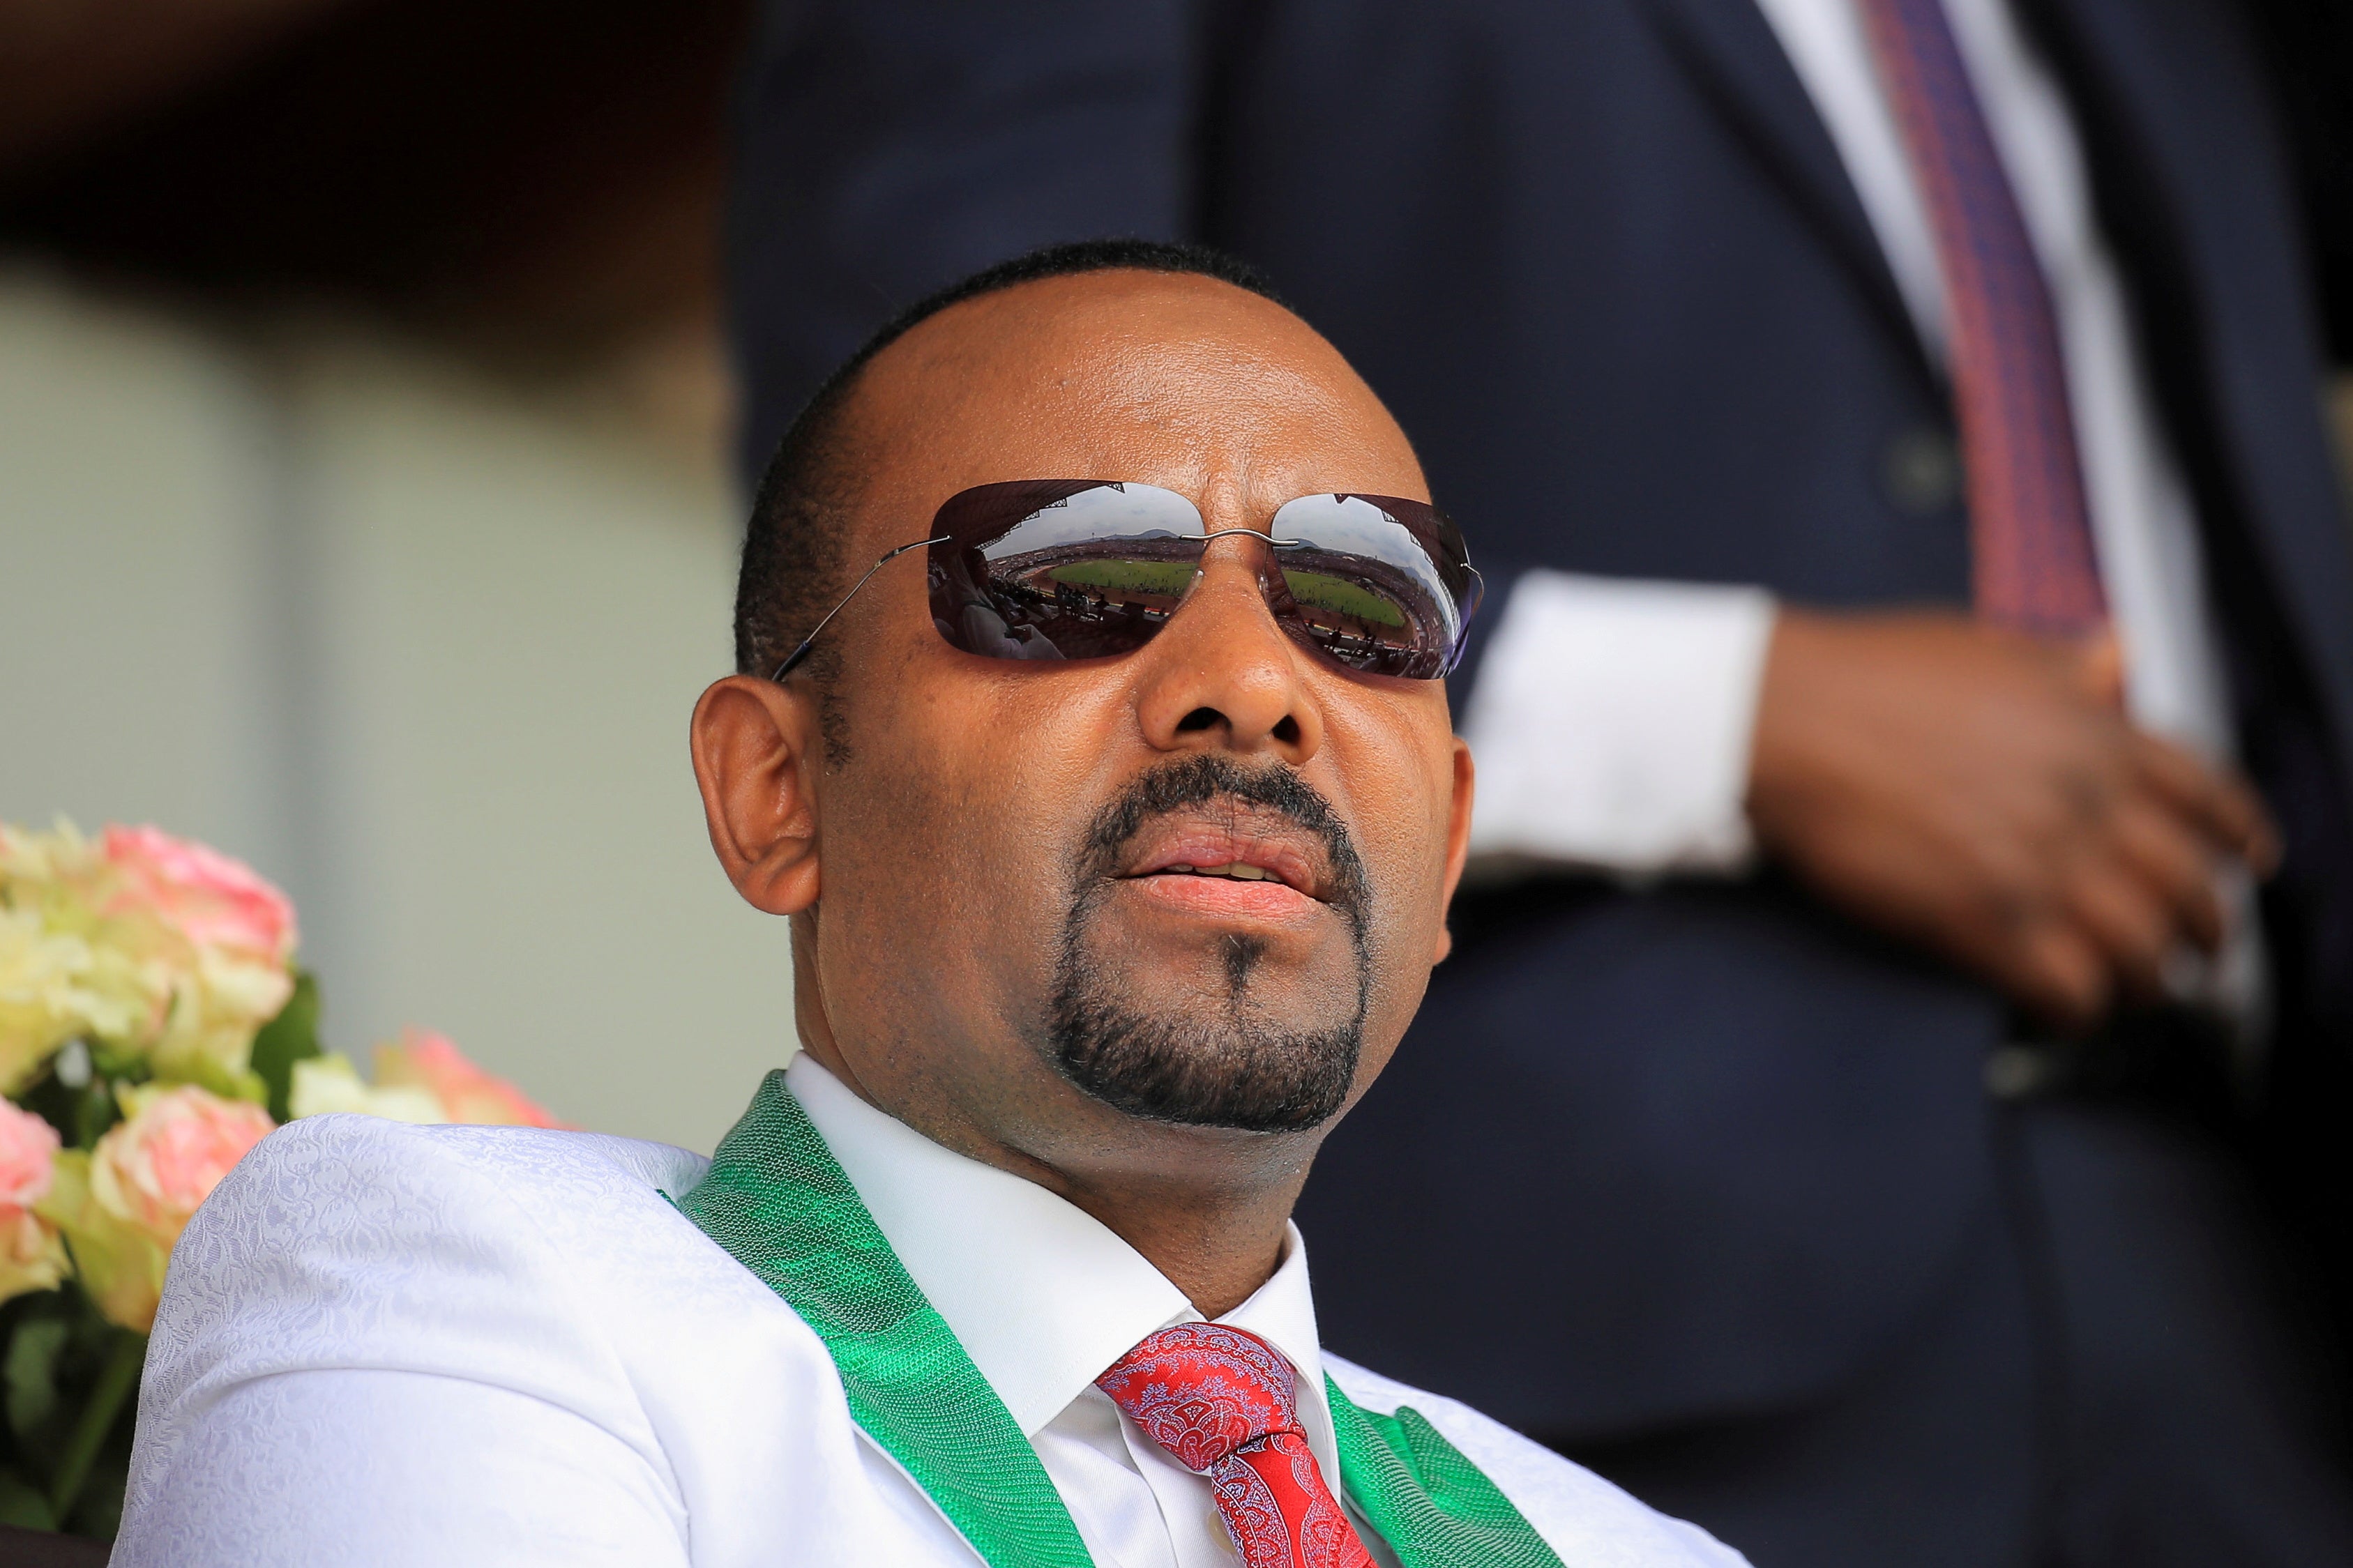 File: Ethiopian Prime Minister Abiy Ahmed at a campaign event in June